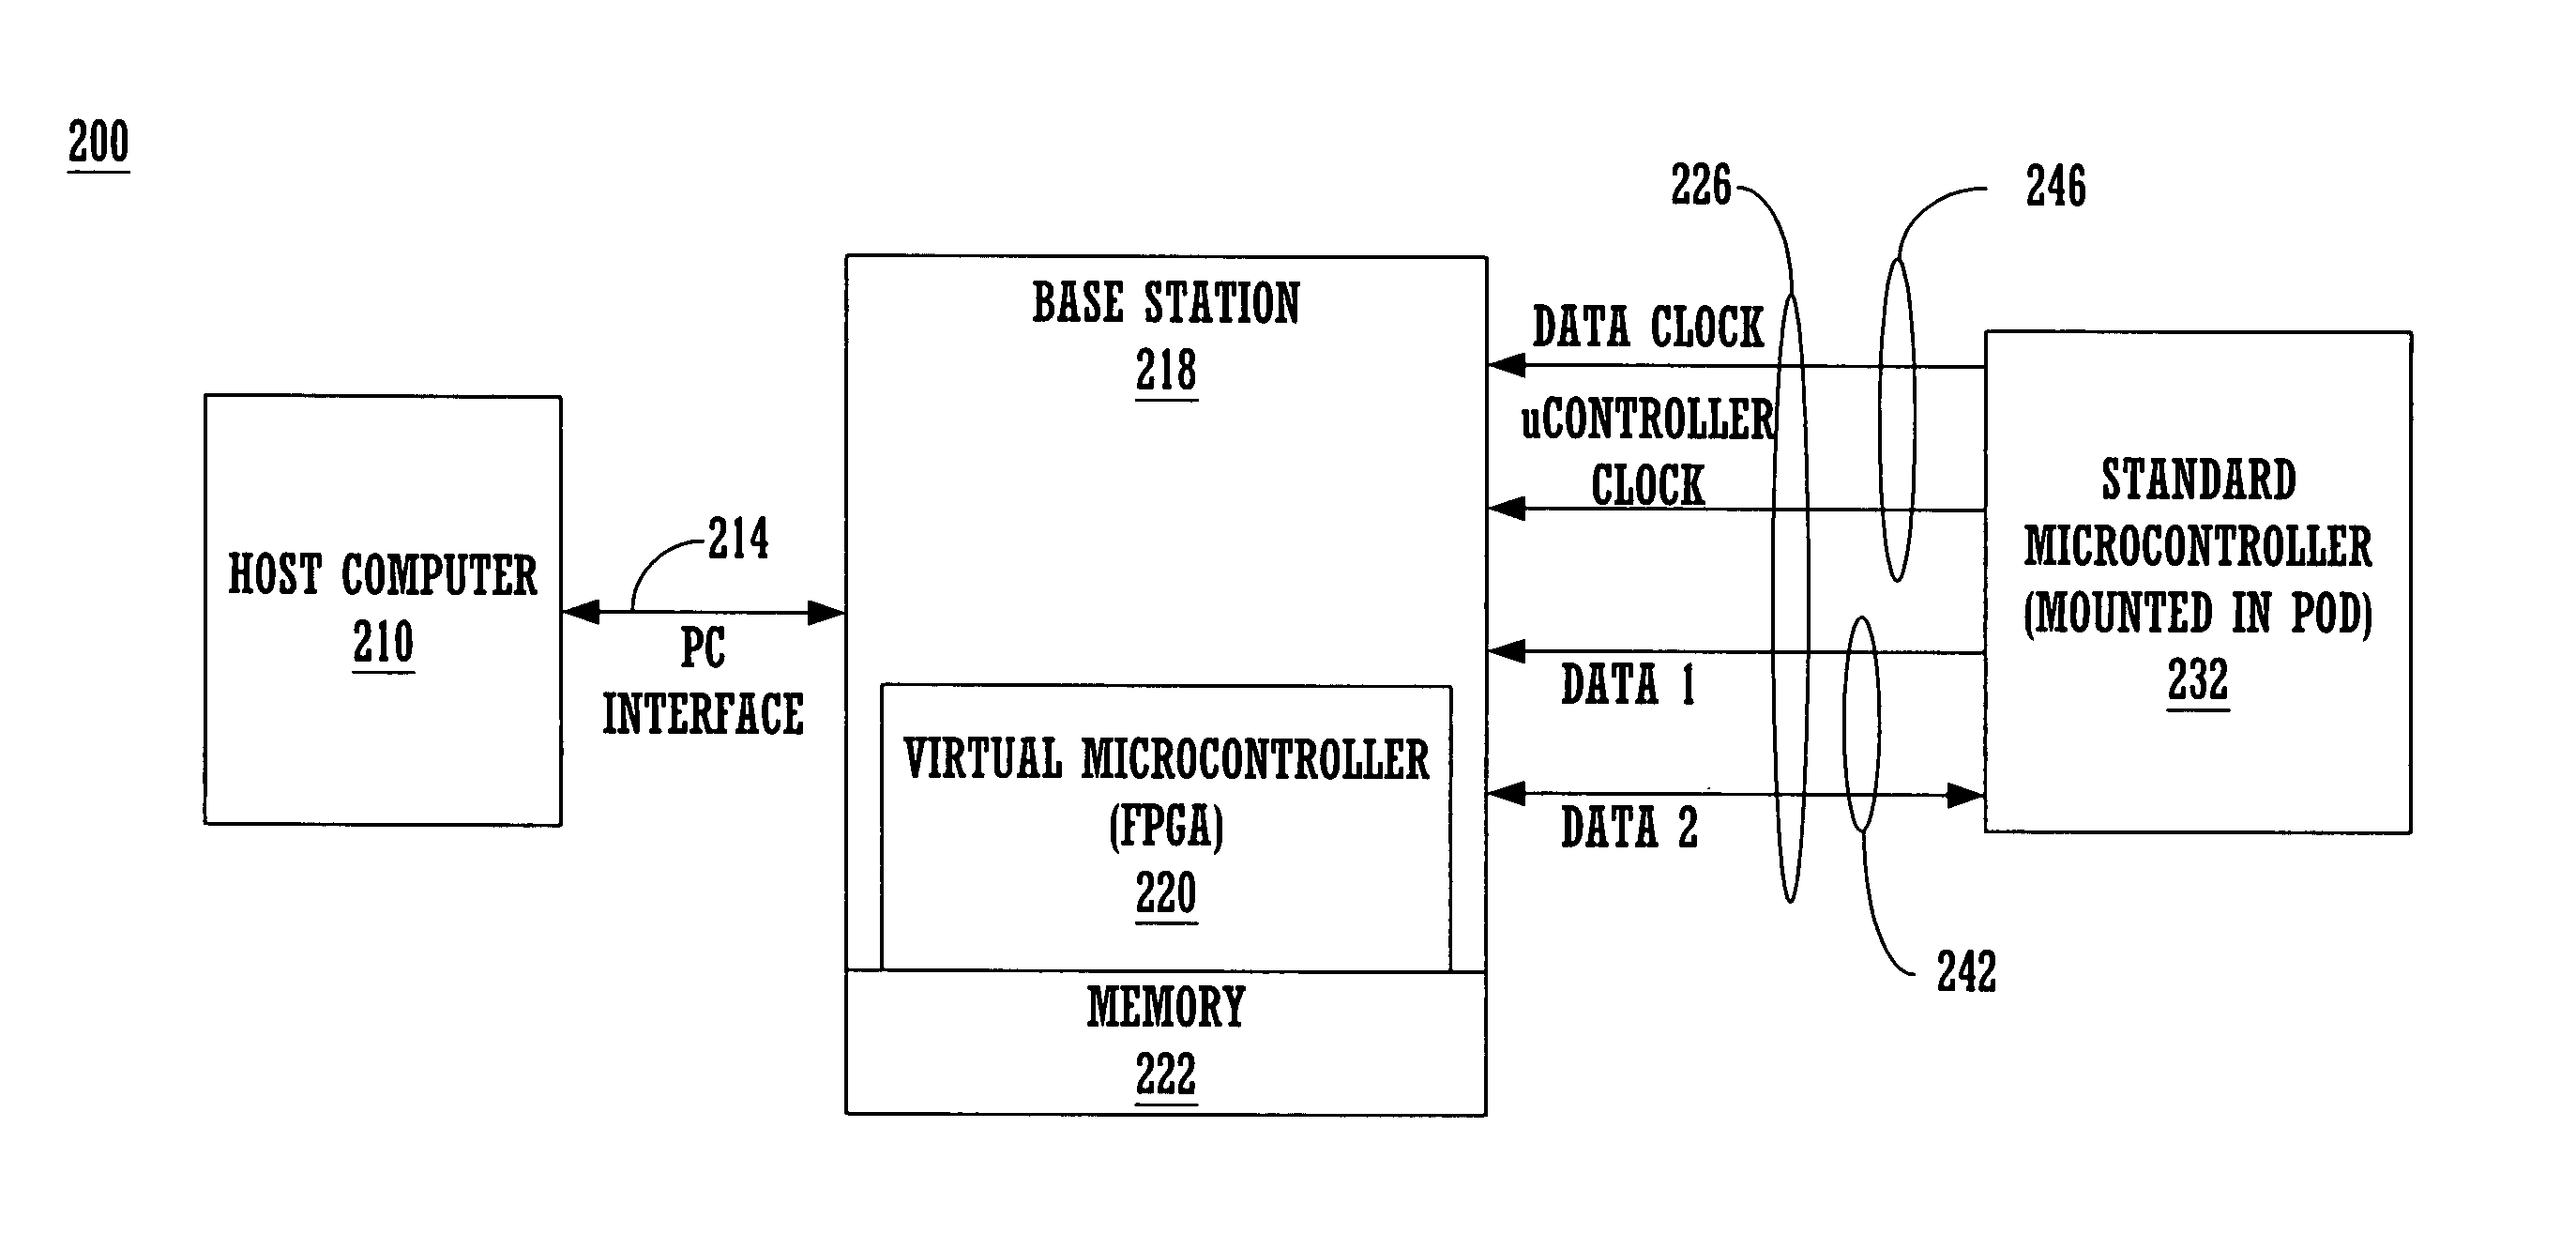 Emulator chip/board architecture and interface